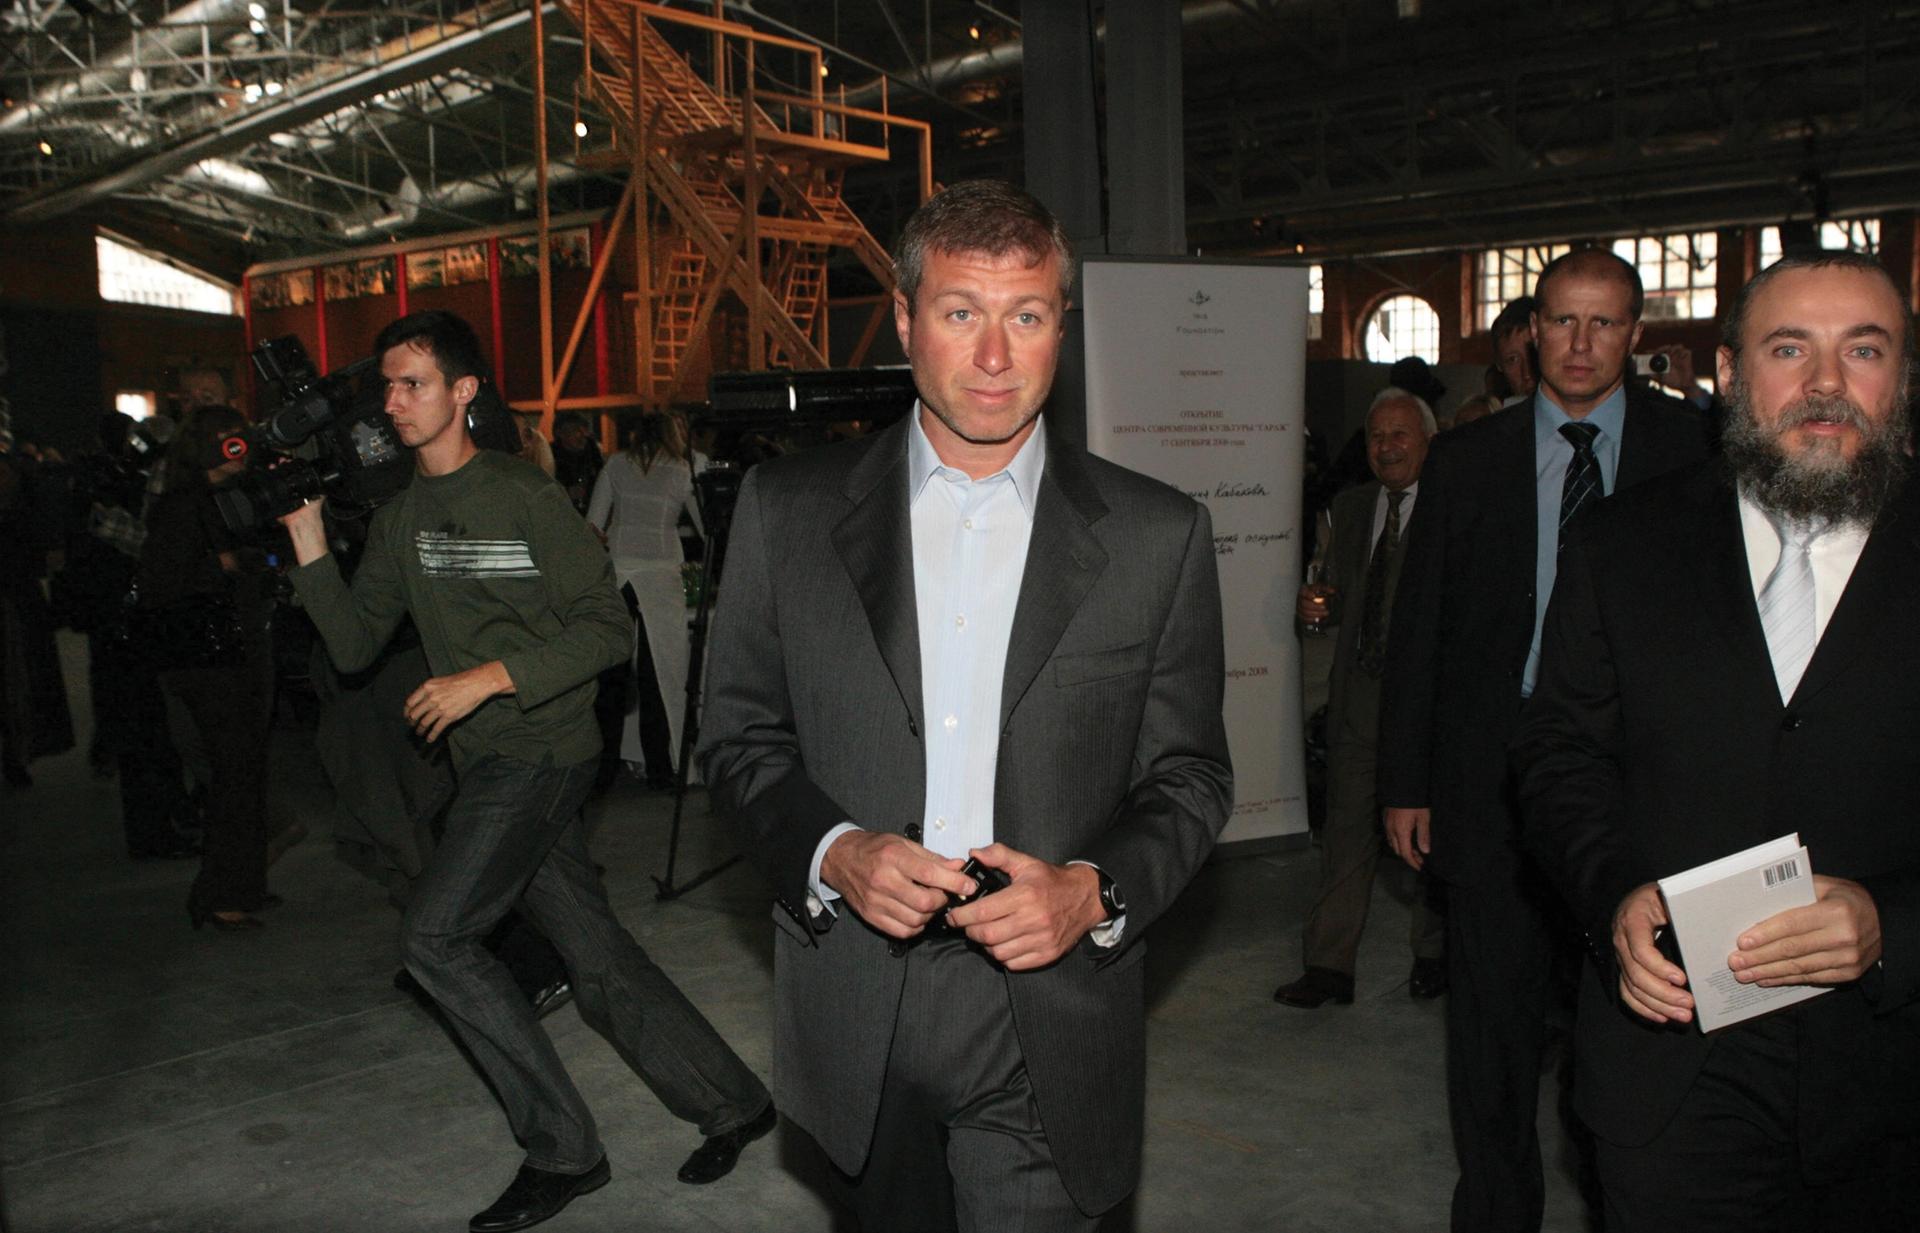 Out of favour: Roman Abramovich at the 2008 opening of the Garage Center for Contemporary Culture in Moscow. Until recently based in London, Abramovich has been sanctioned by the UK government as a “pro-Kremlin oligarch” Natalia Kolesnikova/AFP via Getty Images